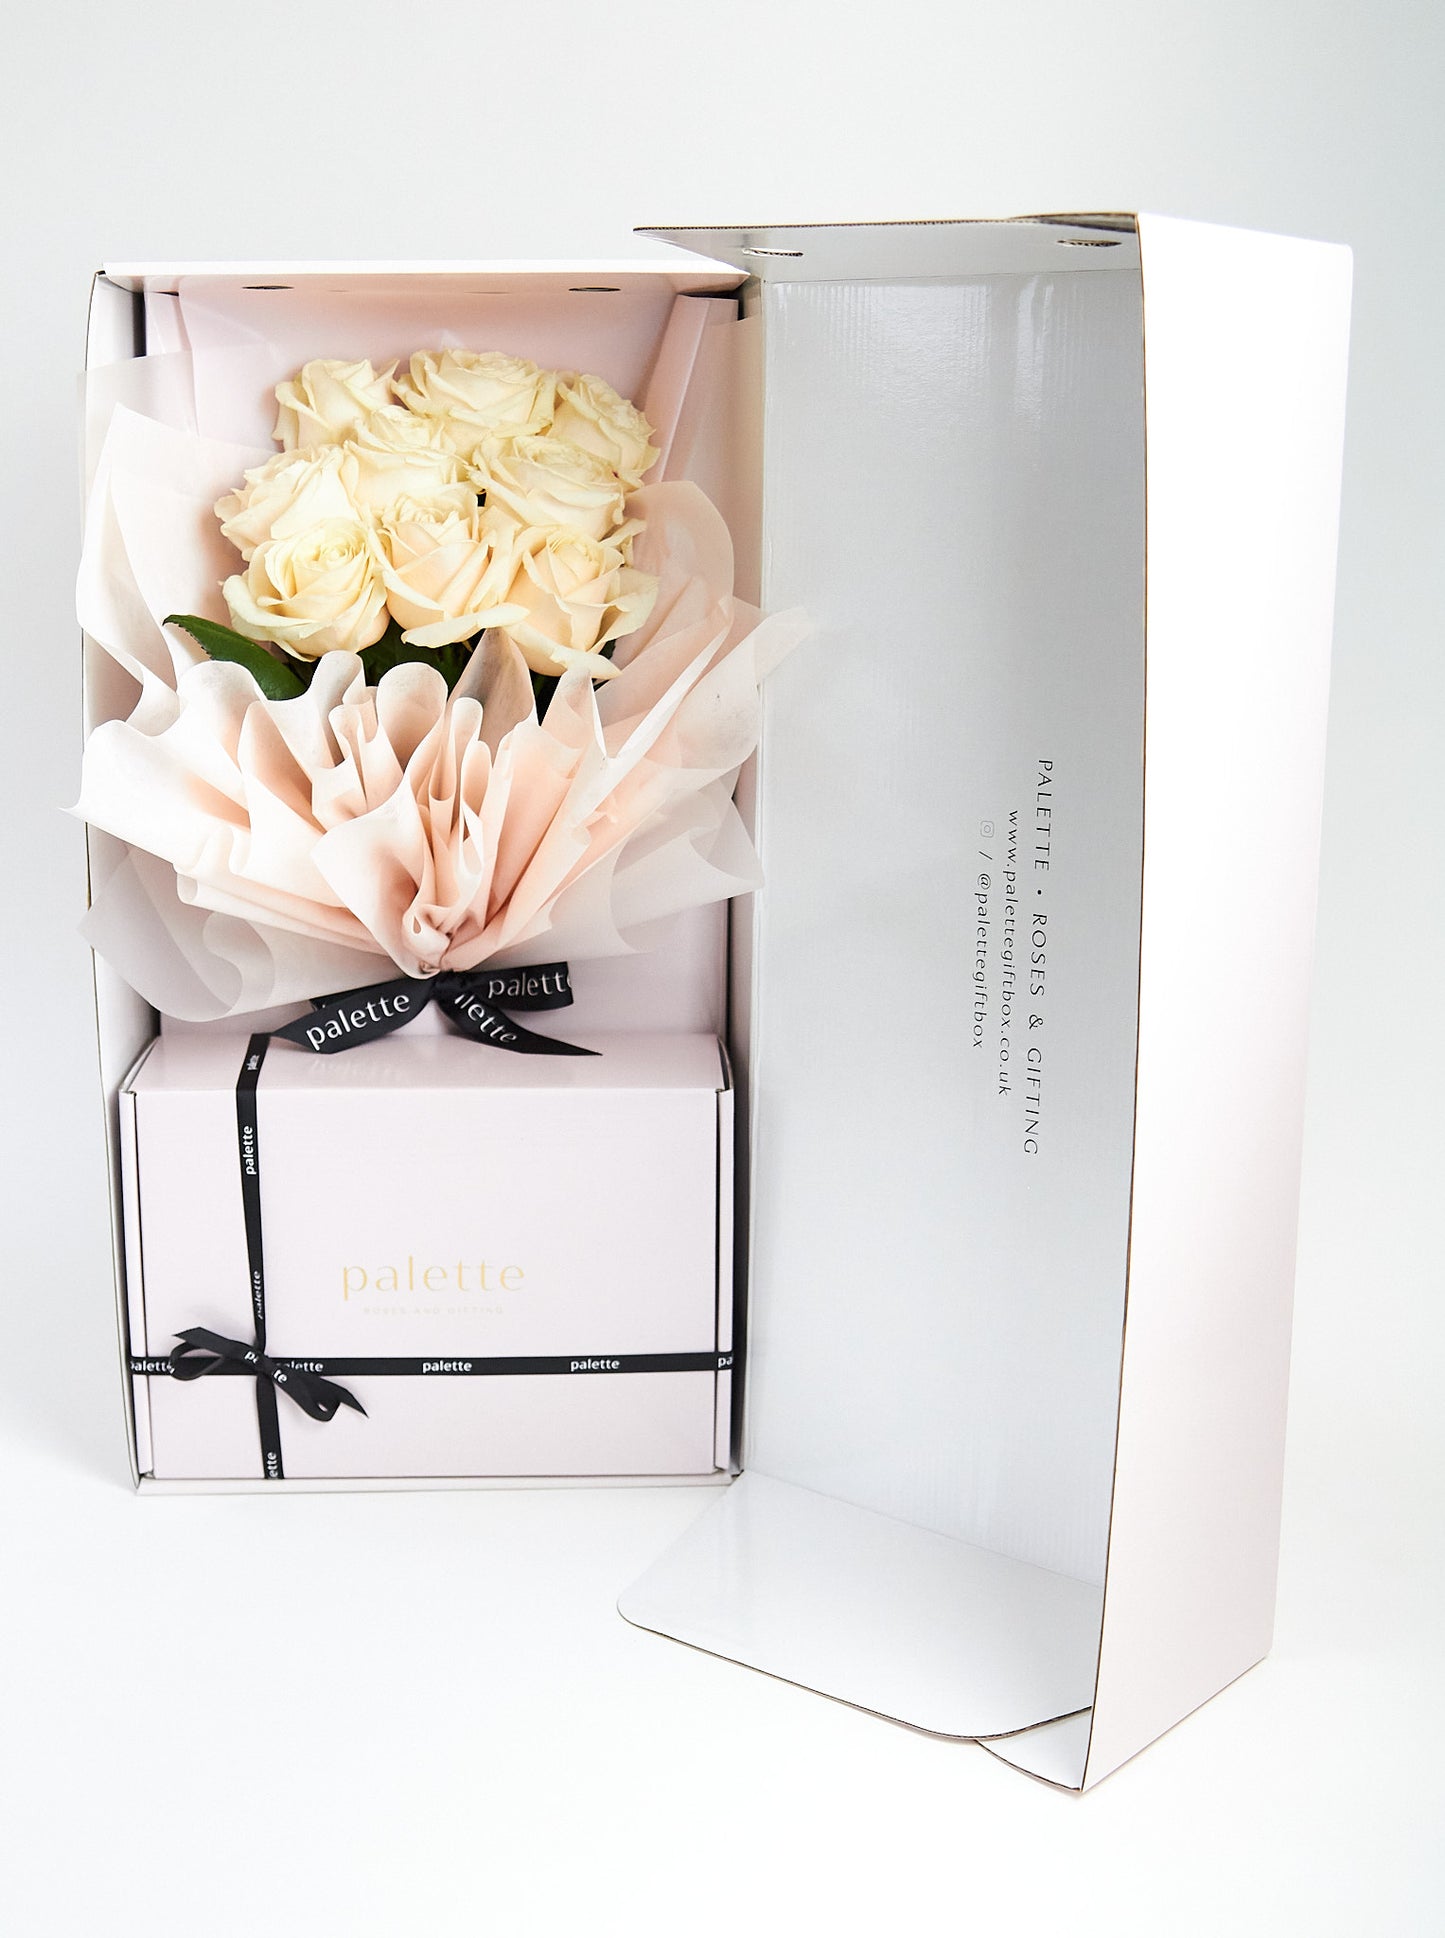 'JUST BECAUSE' PALETTE GIFT BOX